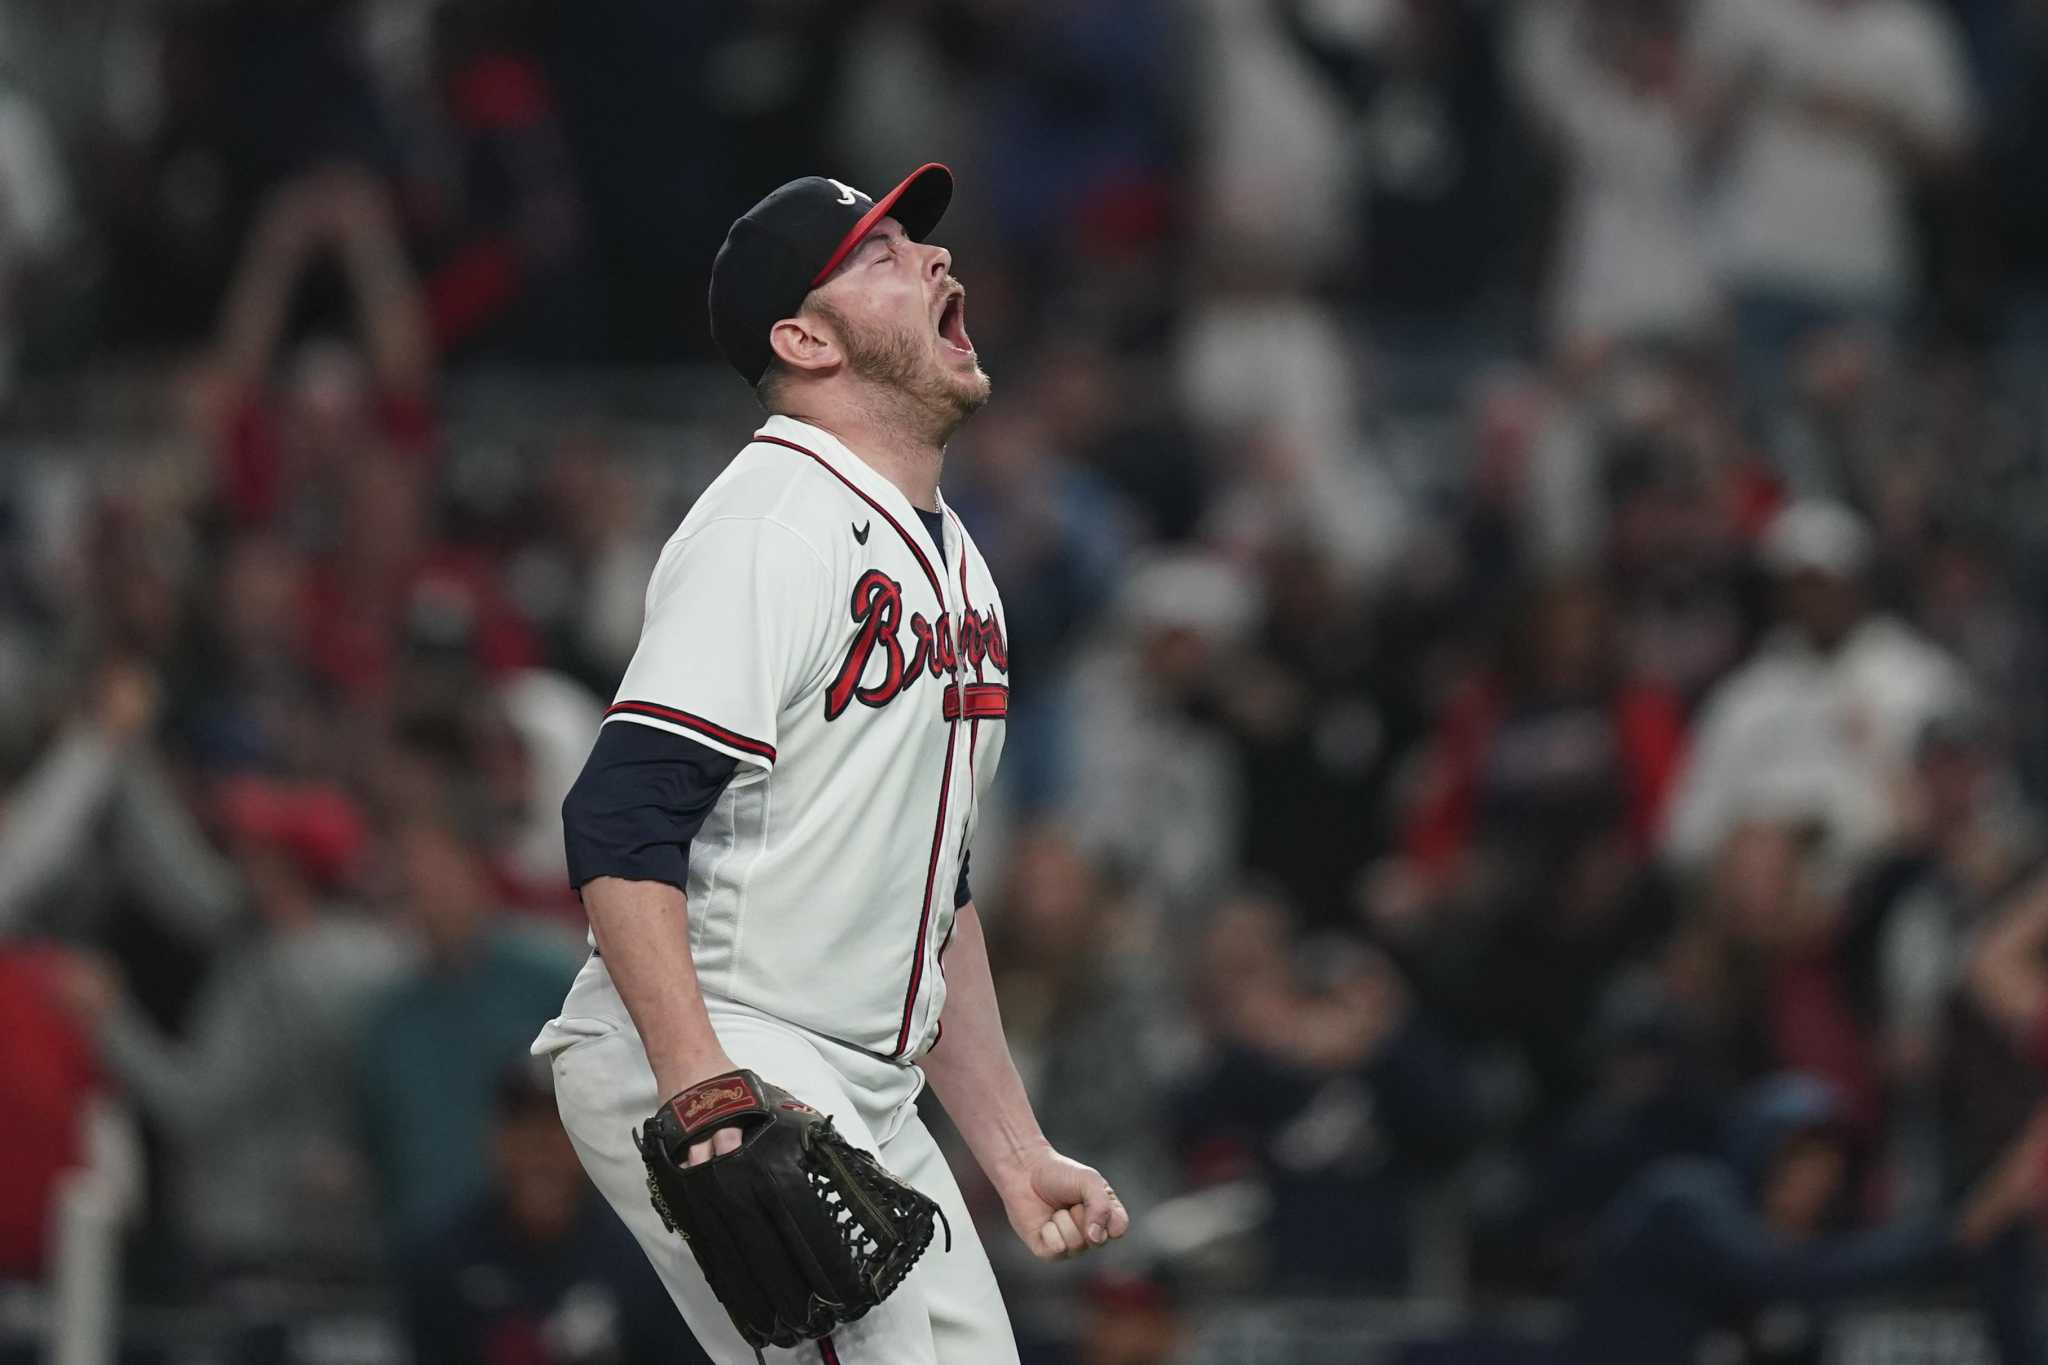 World Series: Braves never gave up, and now they're champions